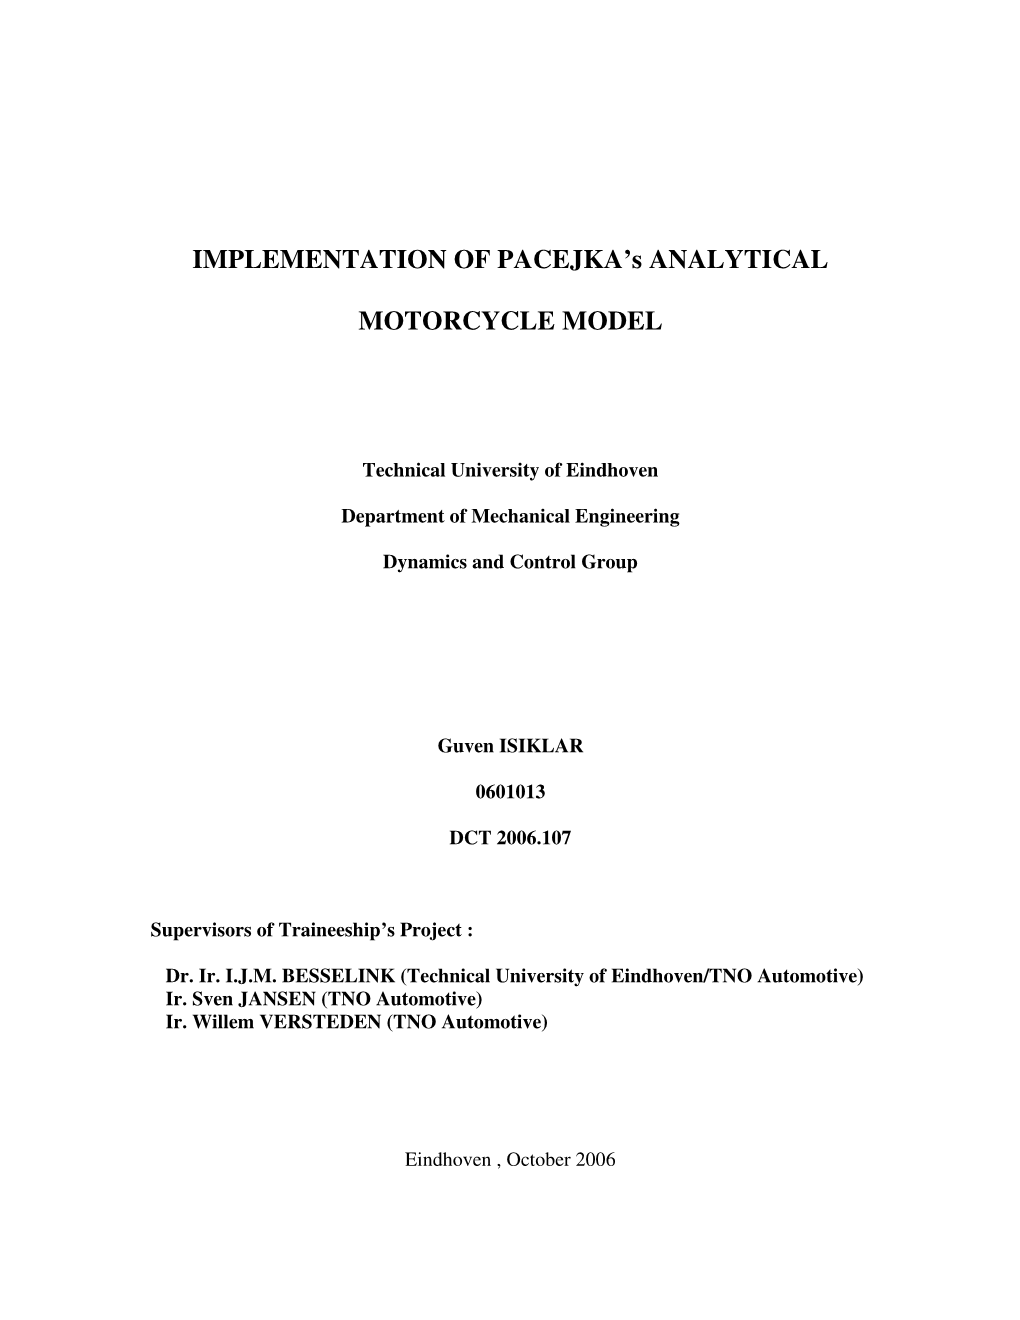 IMPLEMENTATION of PACEJKA's ANALYTICAL MOTORCYCLE